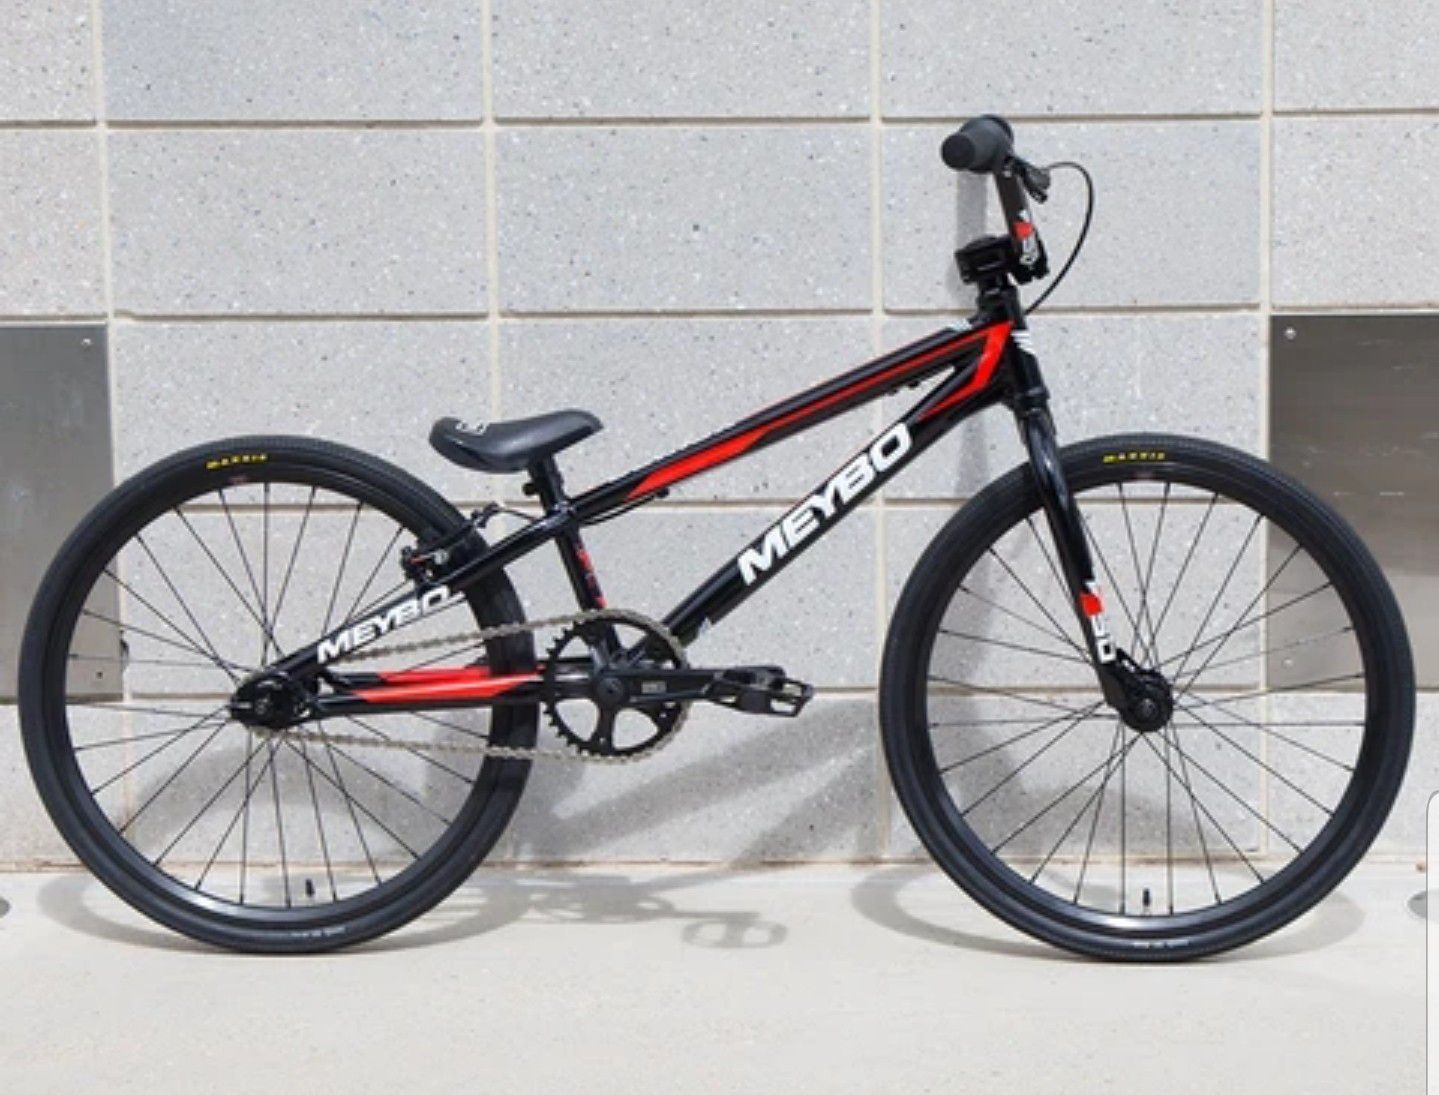 Meybo 2019 20" Clipper Expert XL BMX Race Black and Red -- Brand New! for Sale St. Petersburg, FL - OfferUp